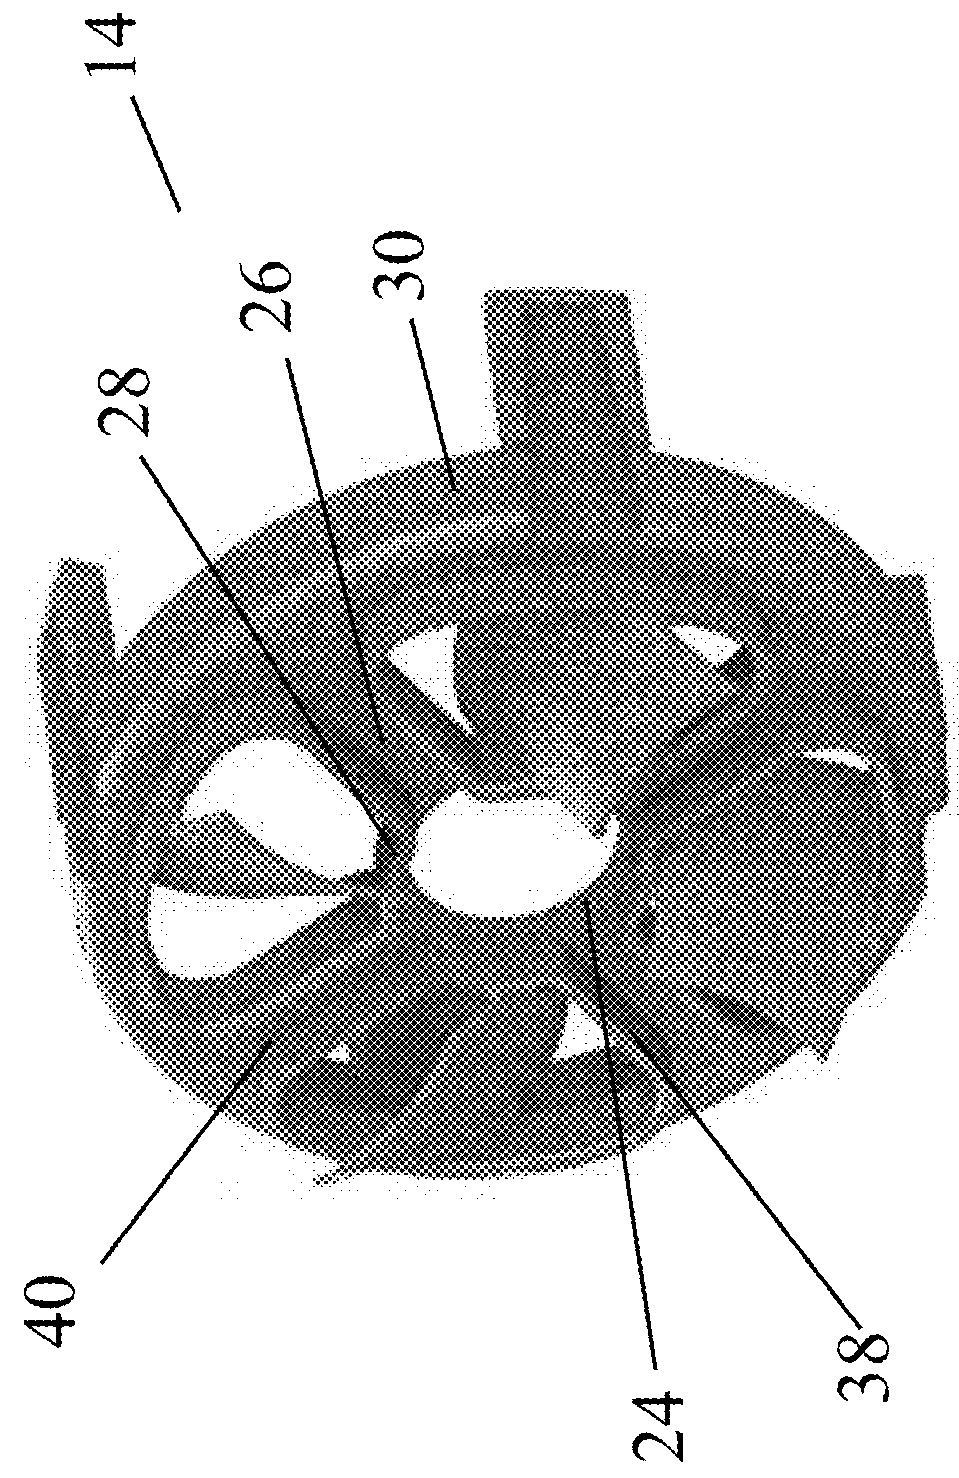 Brushless Direct Current Motor with Integrated Fan